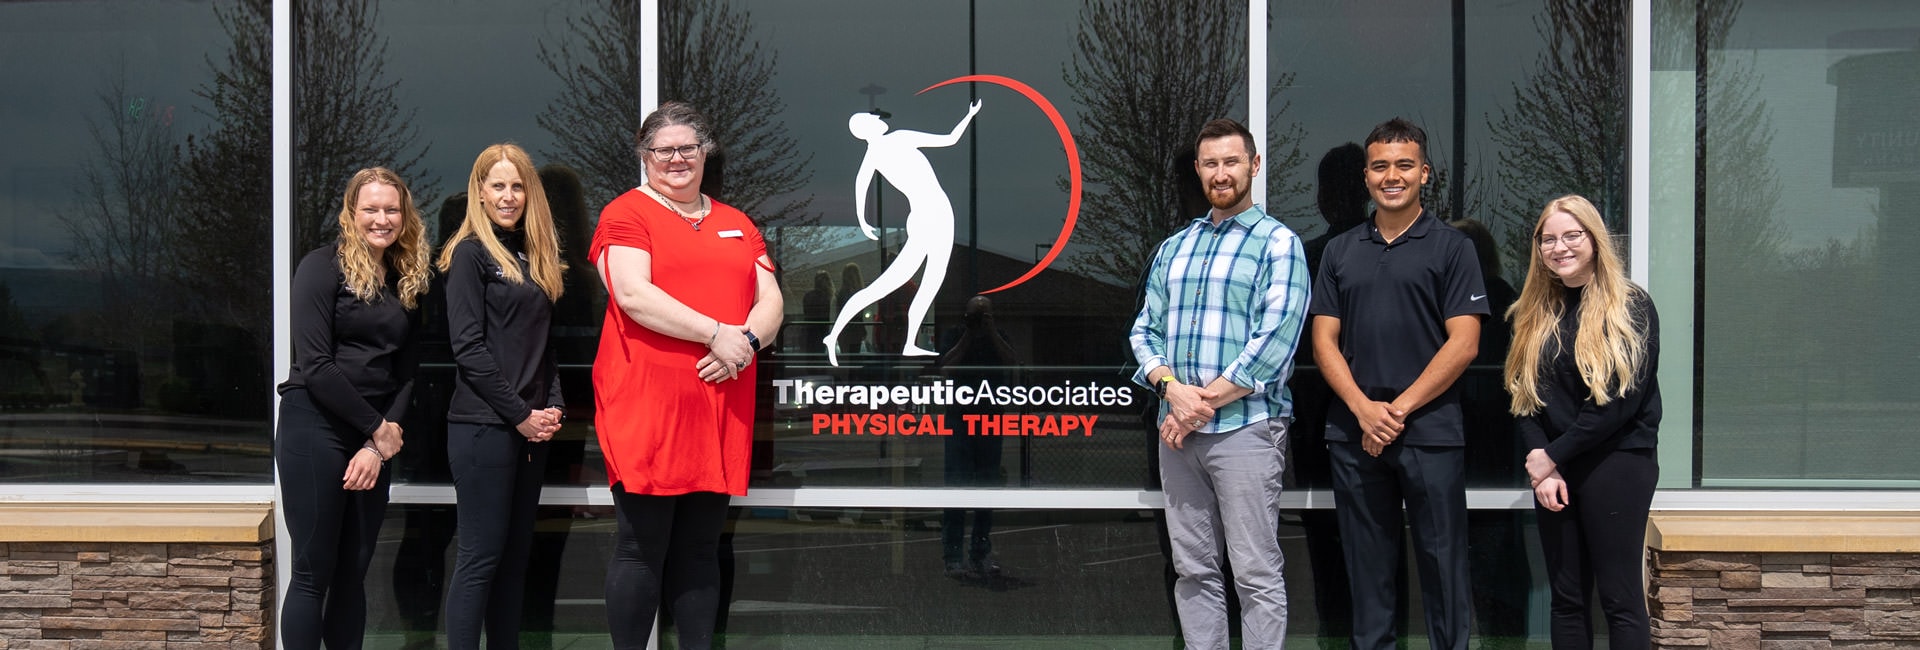 Therapeutic Associates Pasco Physical Therapy